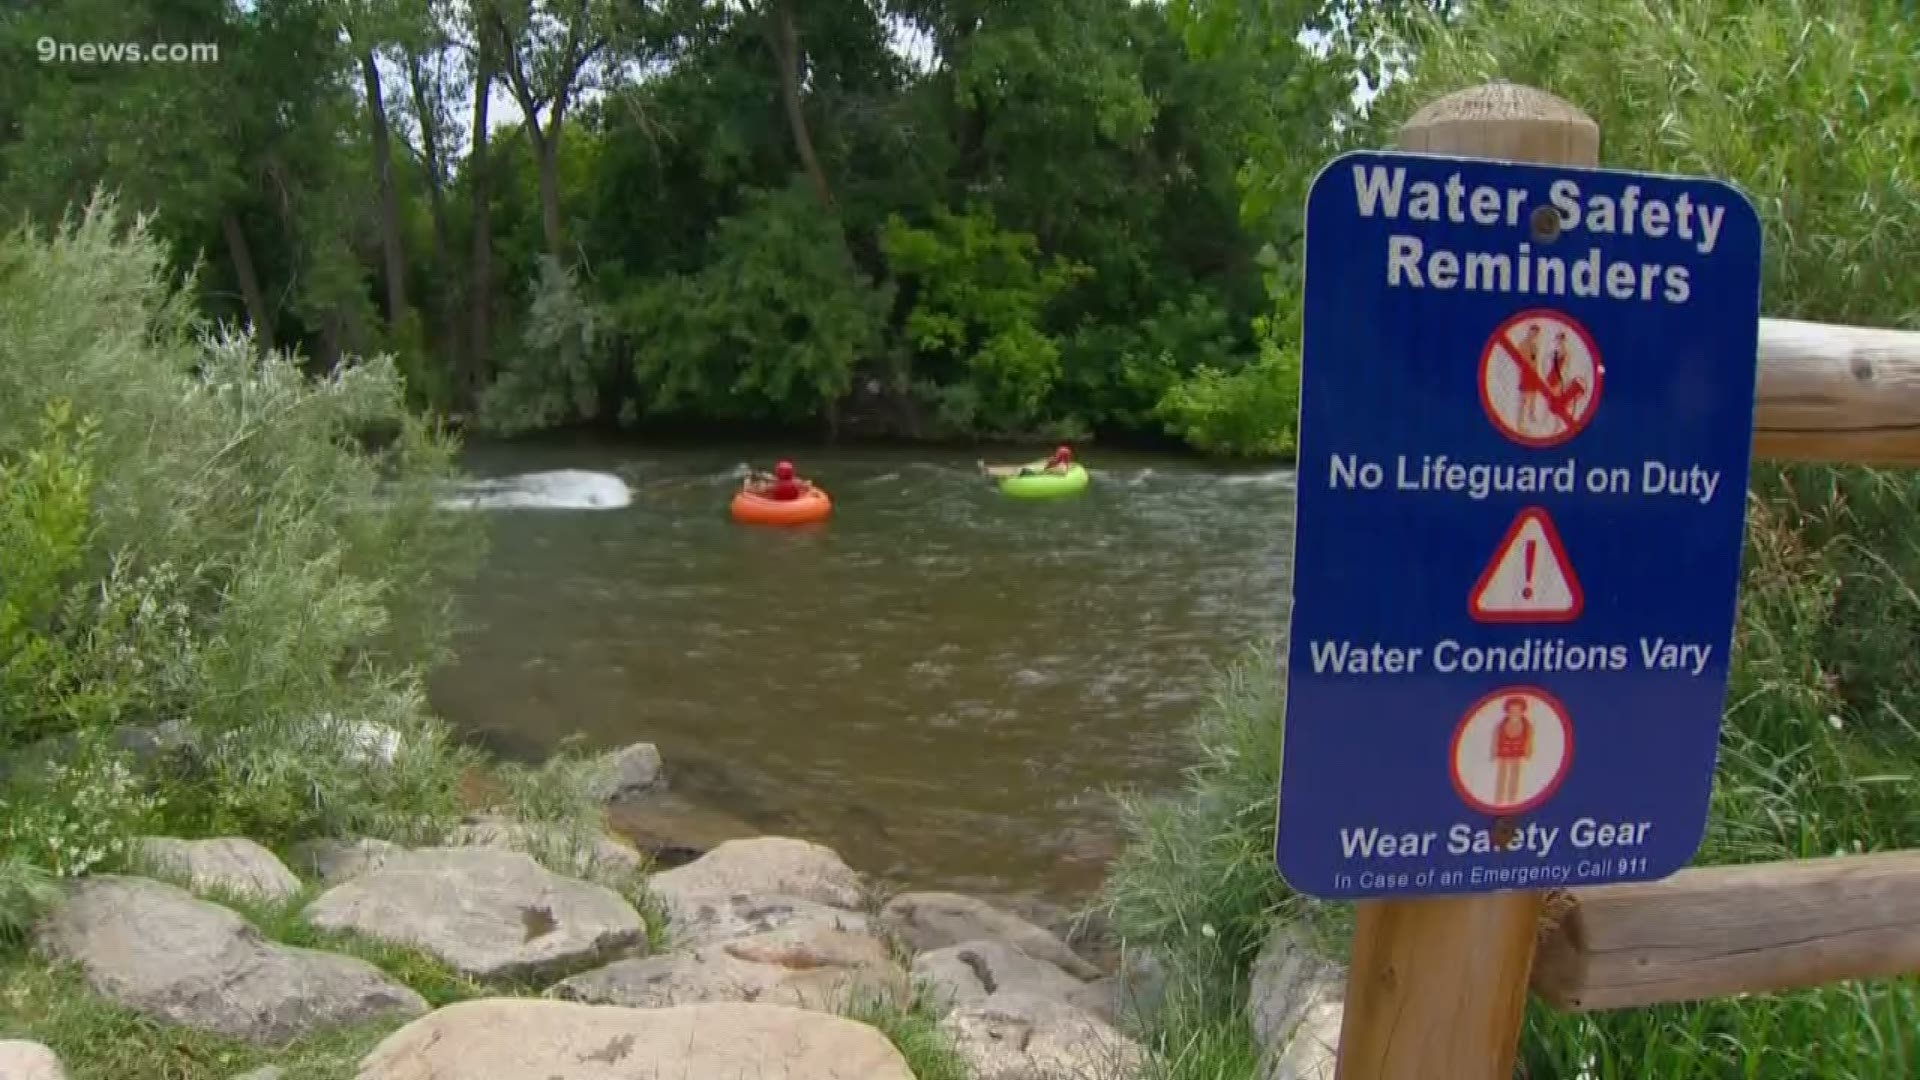 As people flock to Colorado's rivers and creeks - firefighters gear up for rescues and searches.